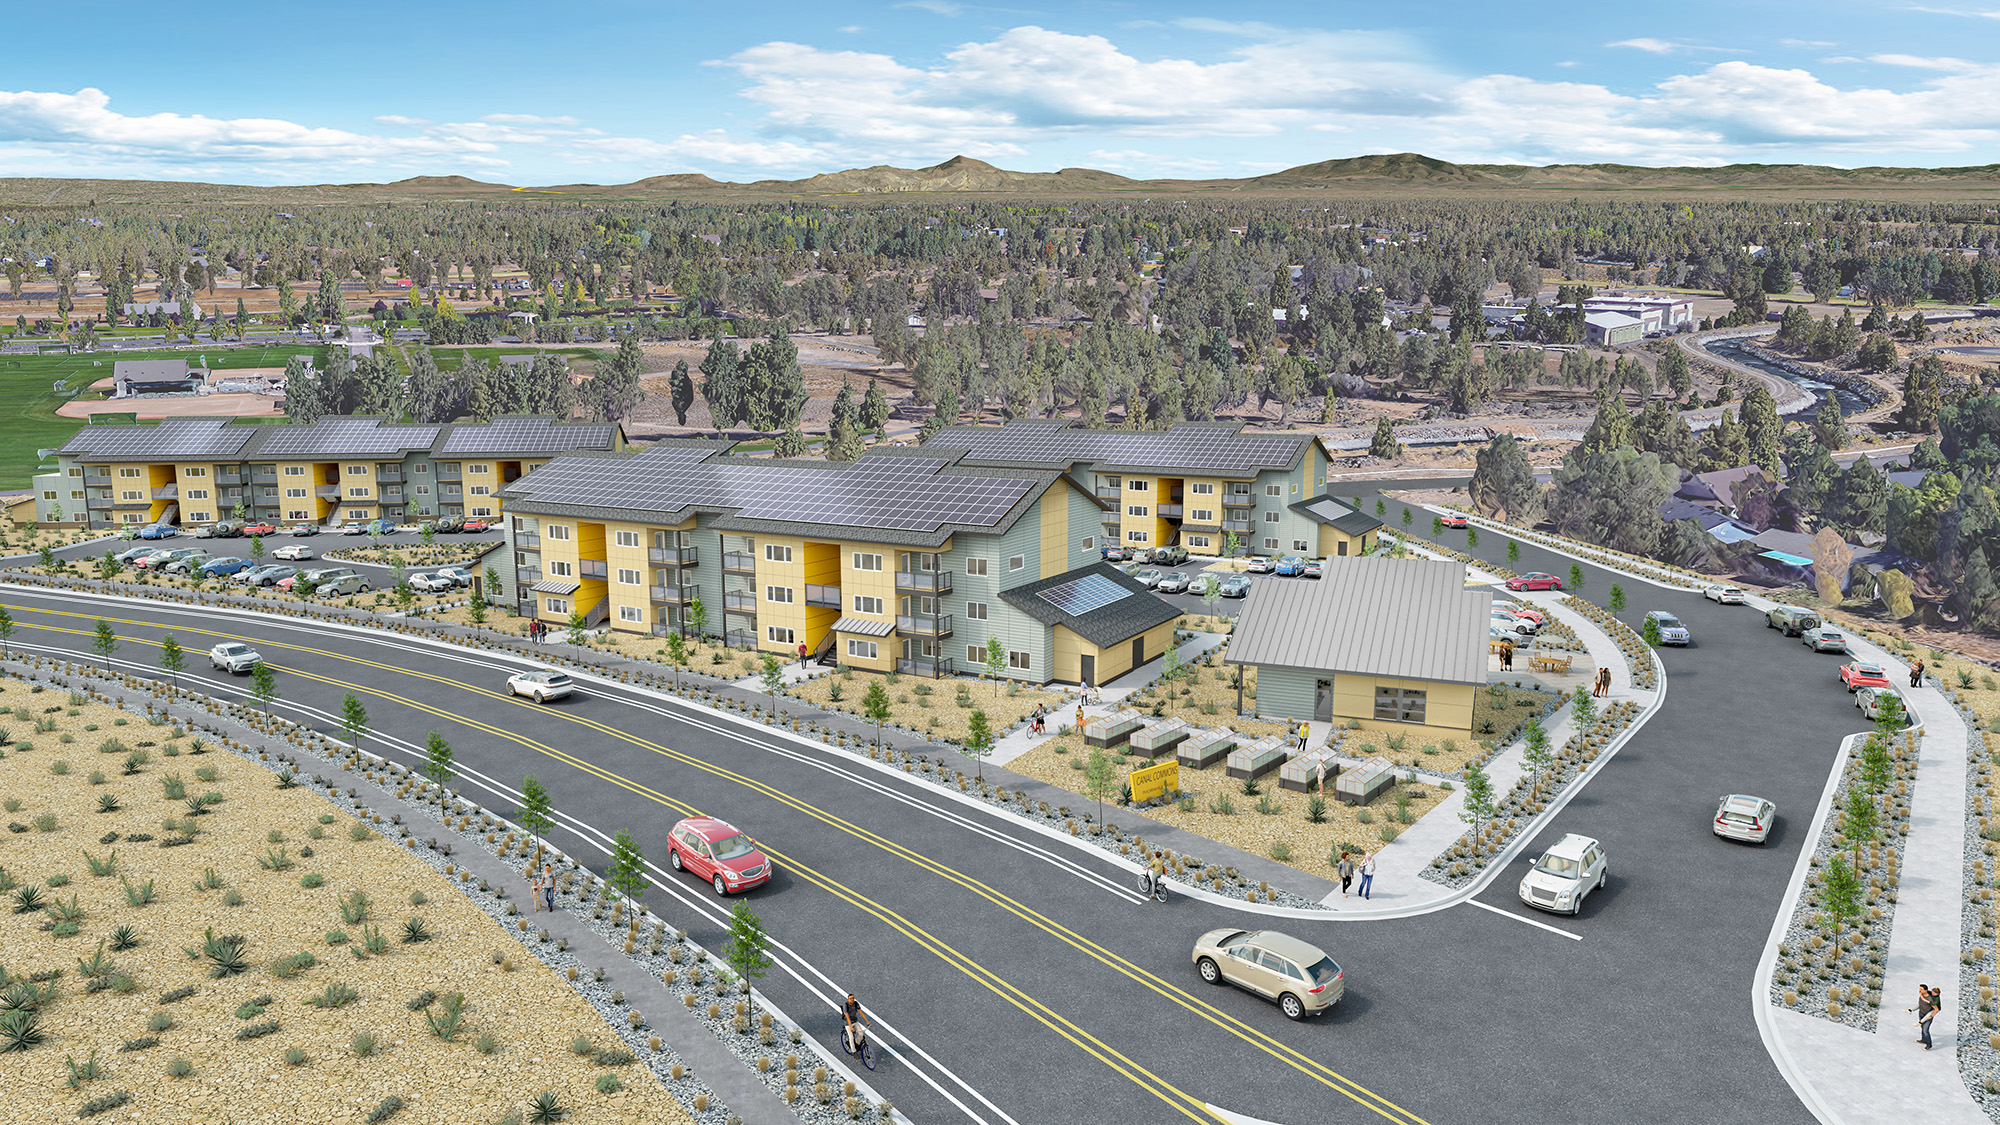 Multifamily development rendering with view of mountains